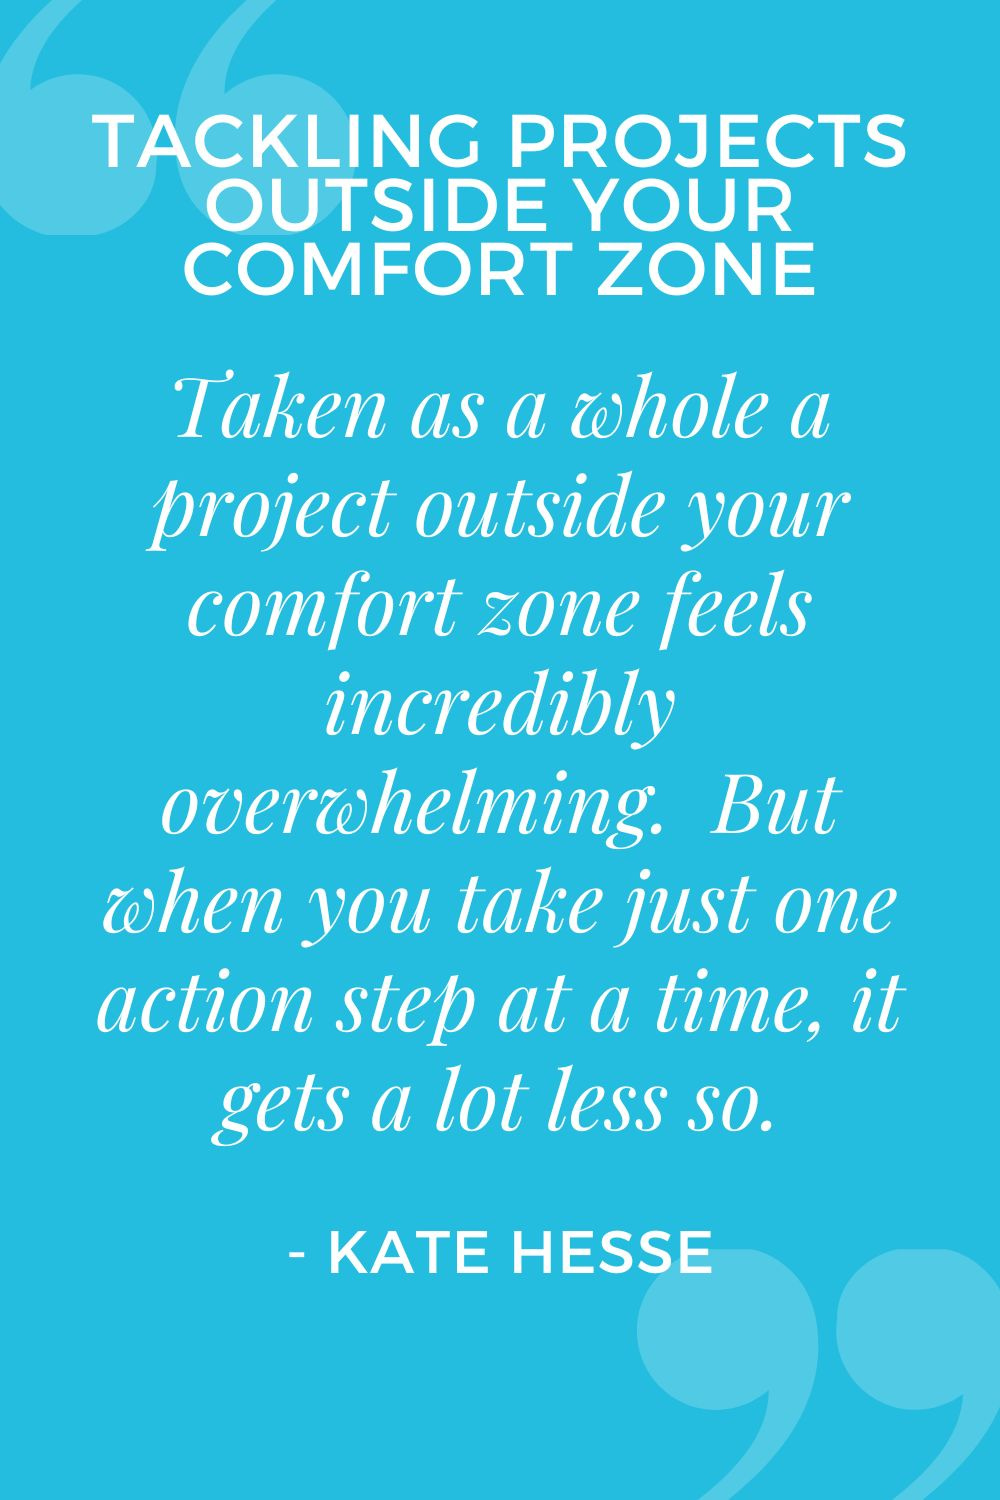 Taken as a whole a project outside your comfort zone feels incredibly overwhelming. But when you take just one action step at a time, it gets a lot less so.